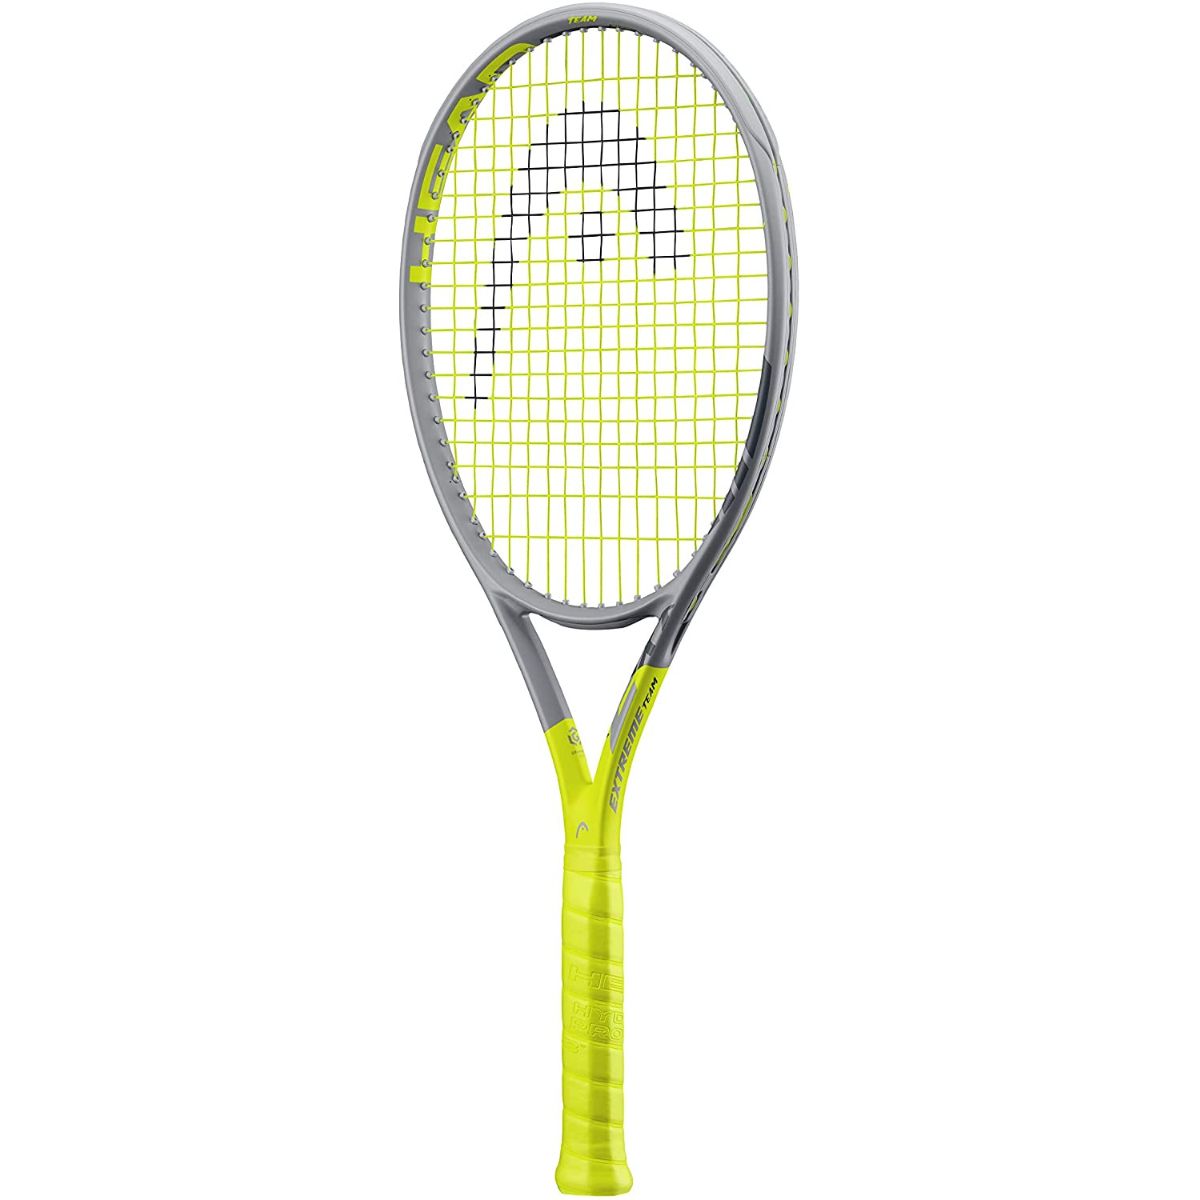 The Best Head Tennis Rackets Options: Head Graphene 360+ Extreme Tour